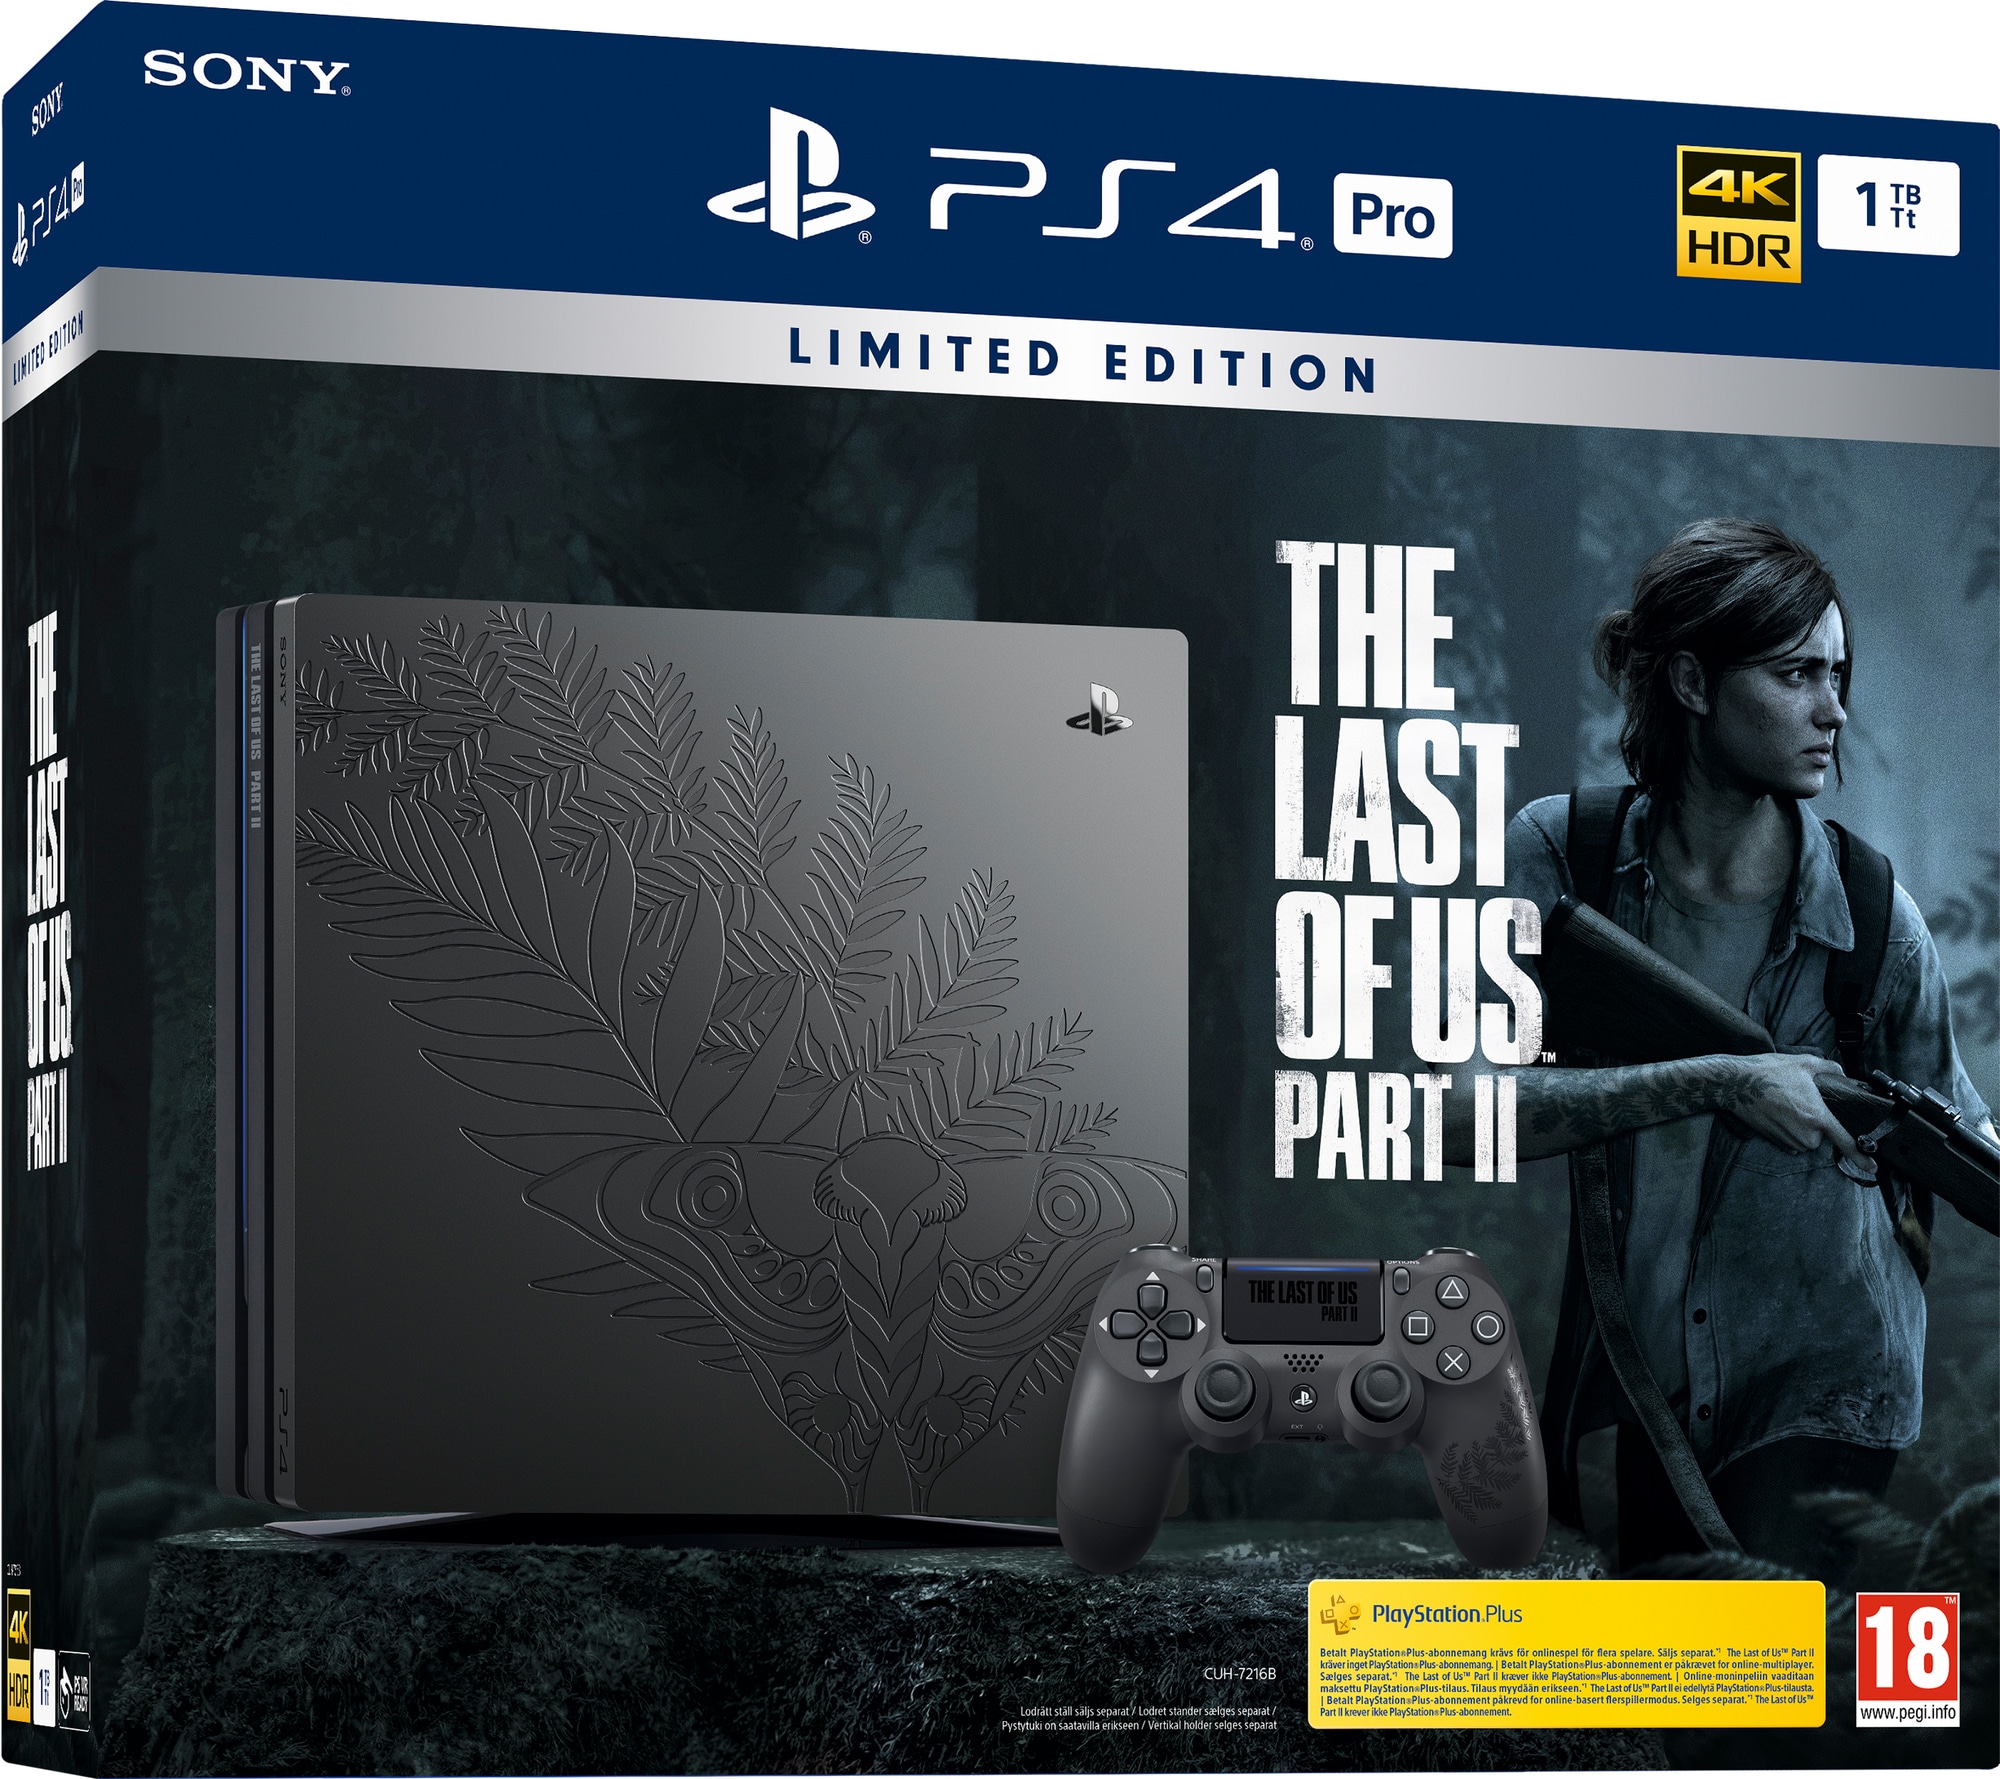 PlayStation 4 Pro 1 TB: The Last of Part II limited Elgiganten